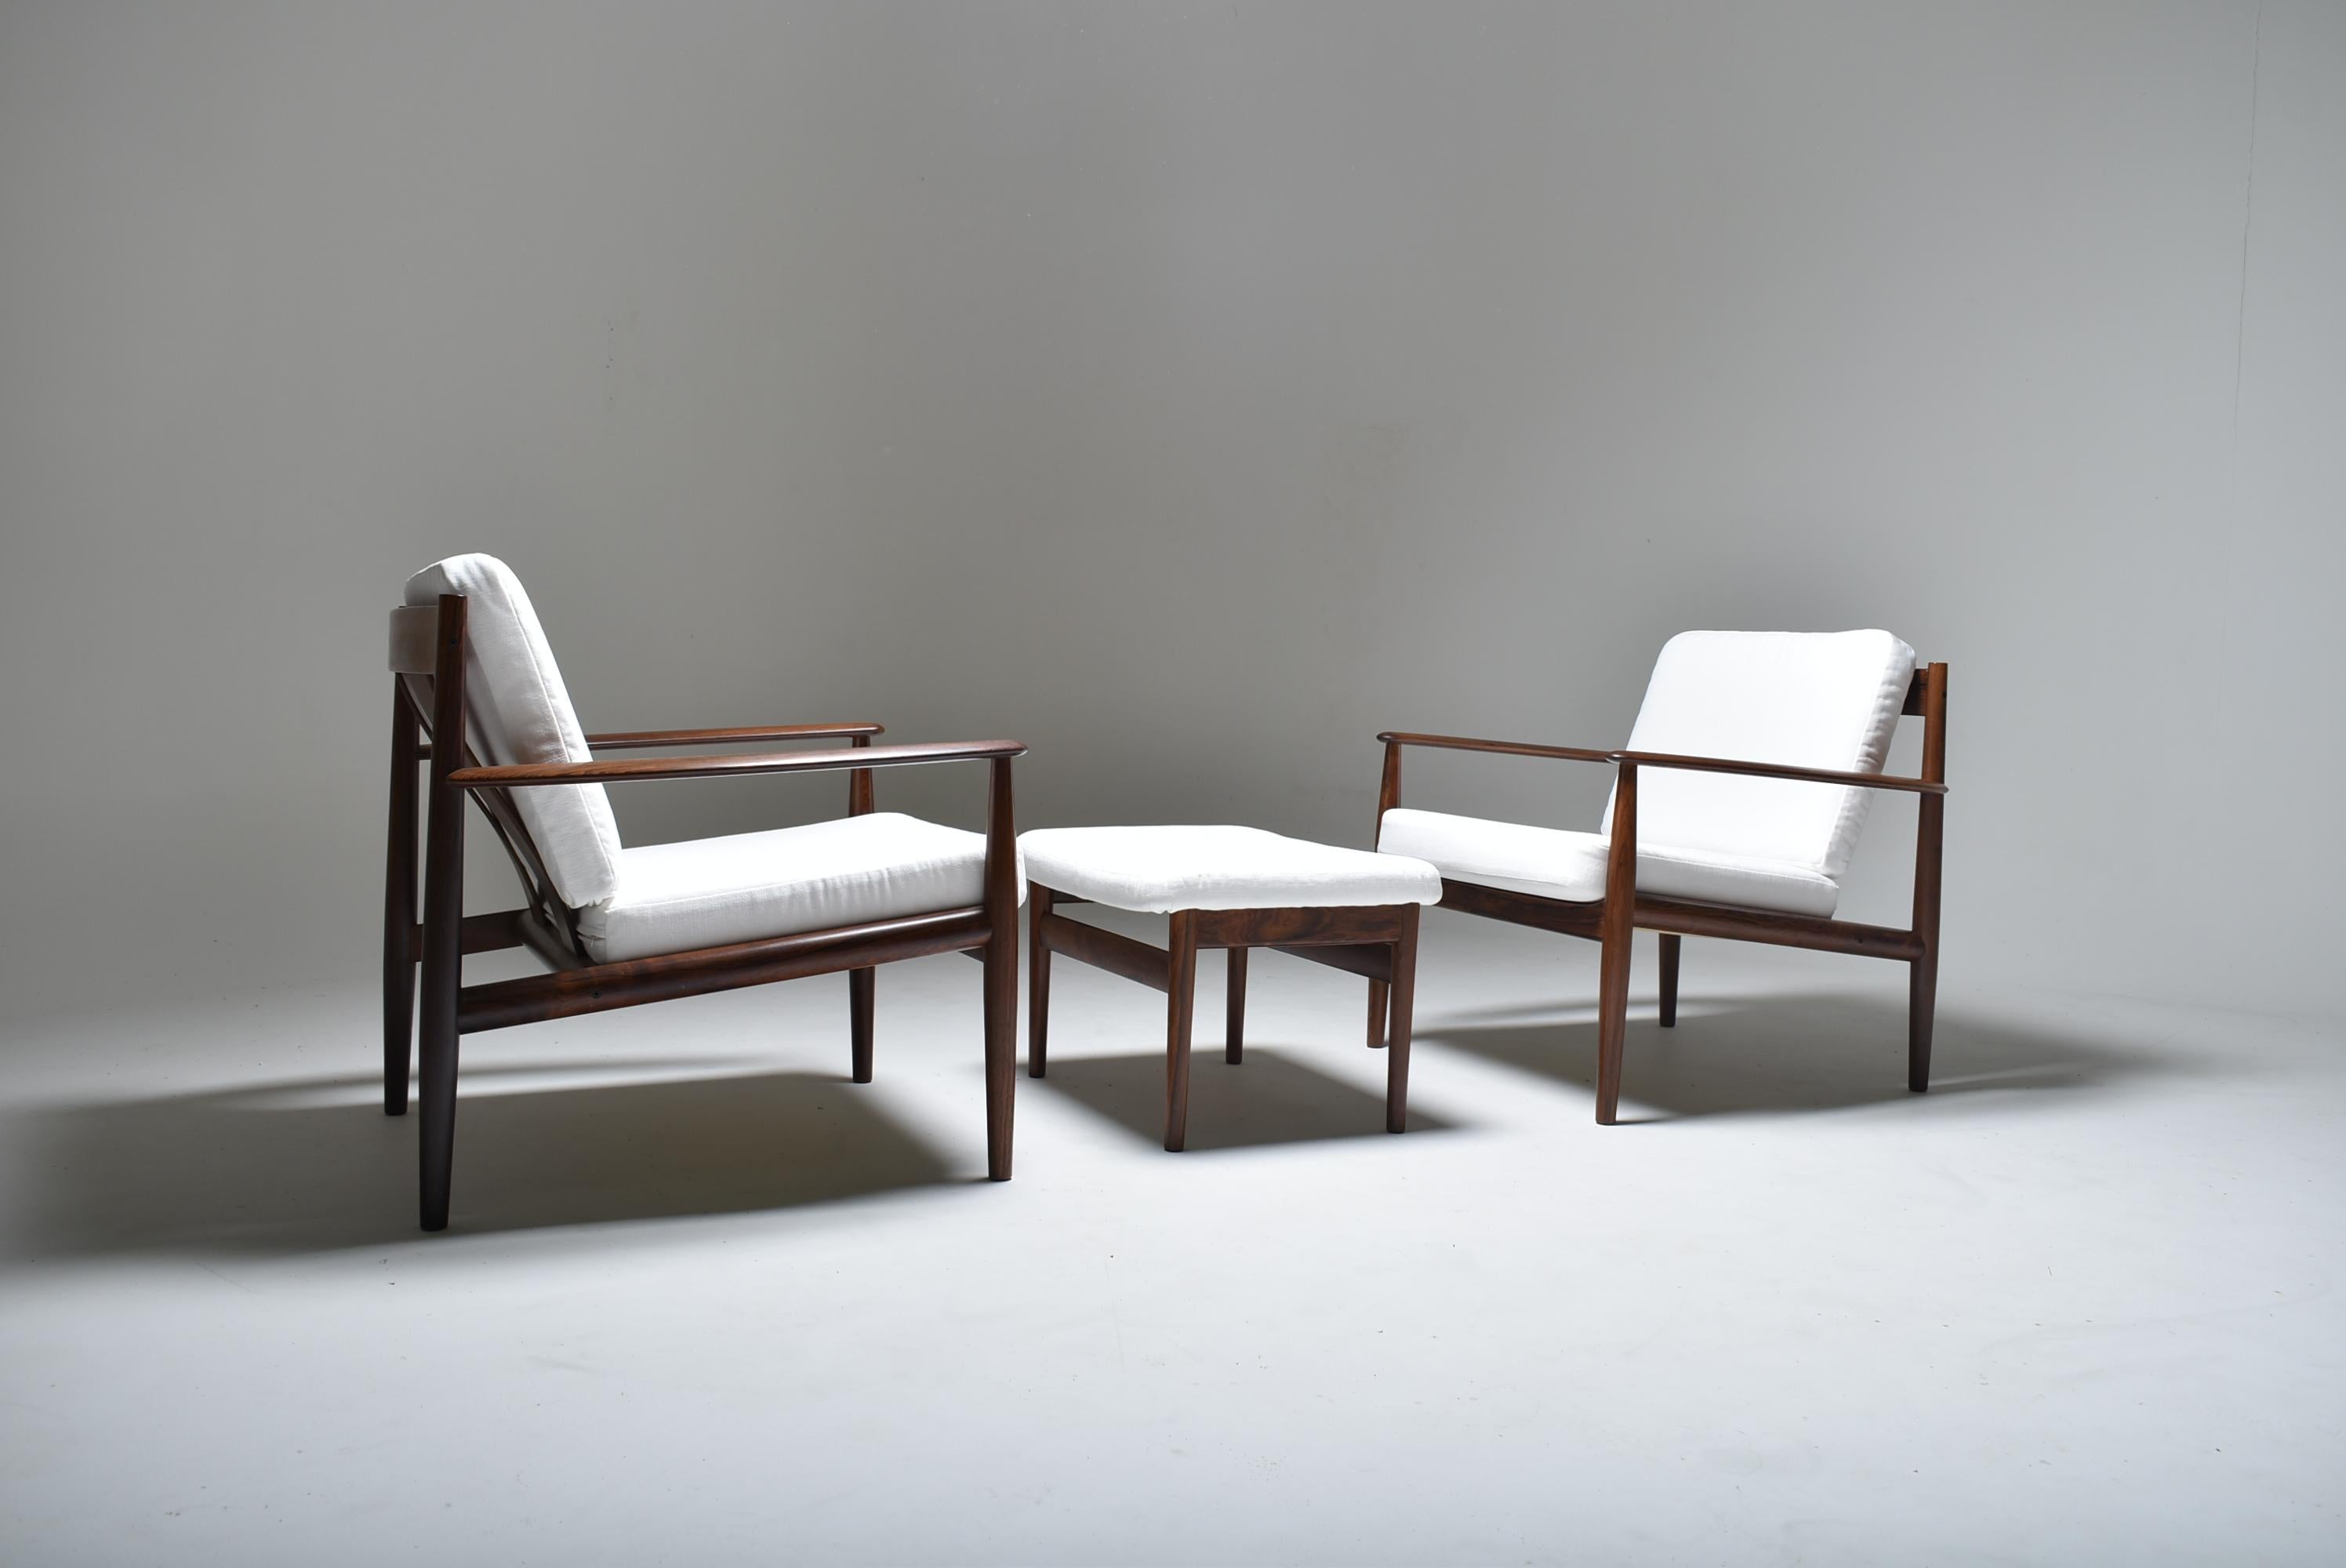 Set of two lounge chairs model 128 and one ottoman, designed by Grete Jalk, Denmark.
True classic due to the association of light and elegant design and perfectly balanced comfort. May be Grete Jalk's best design. 
Crafted according to high